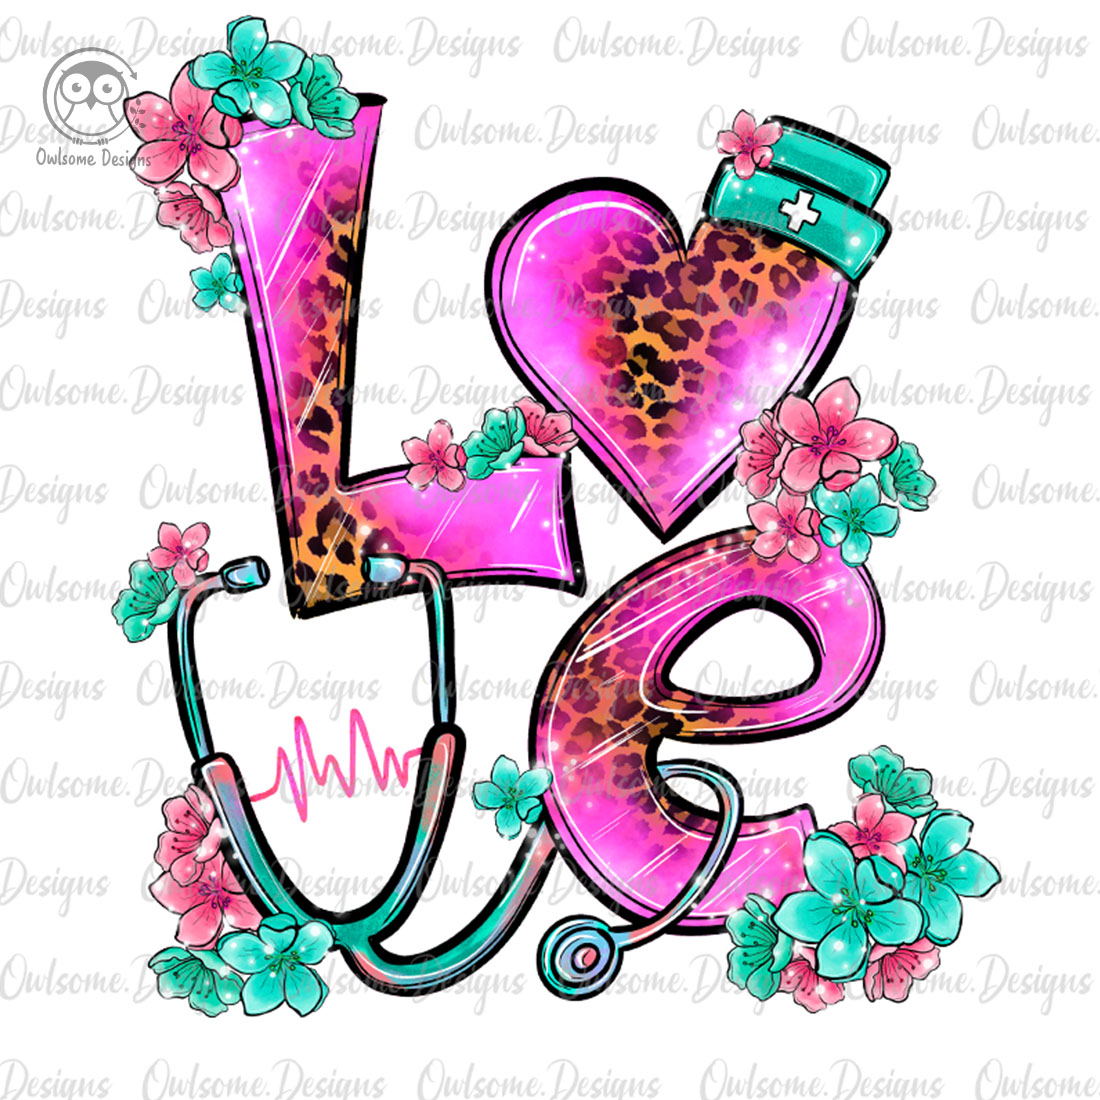 Image with exquisite lettering Love with nurse accessories.